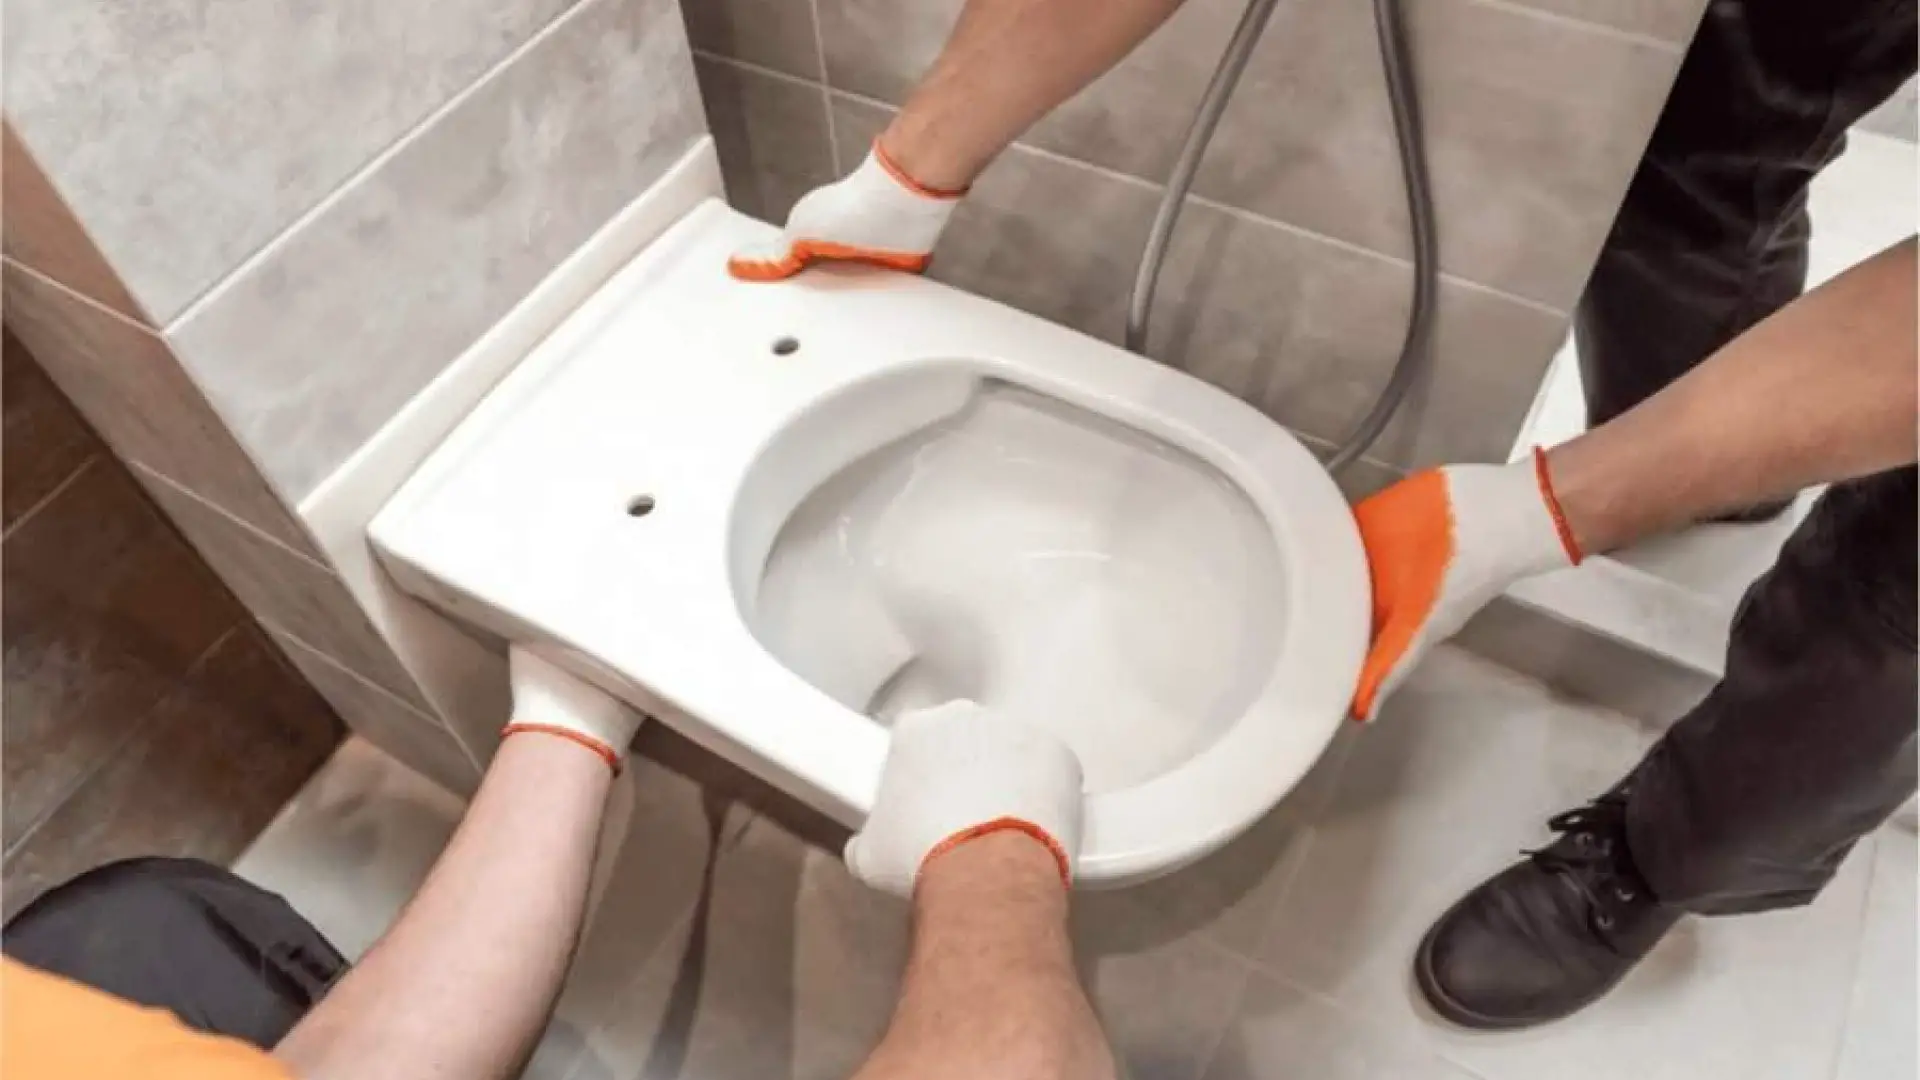 How To Install a Bidet: Easy 5-Step Guide